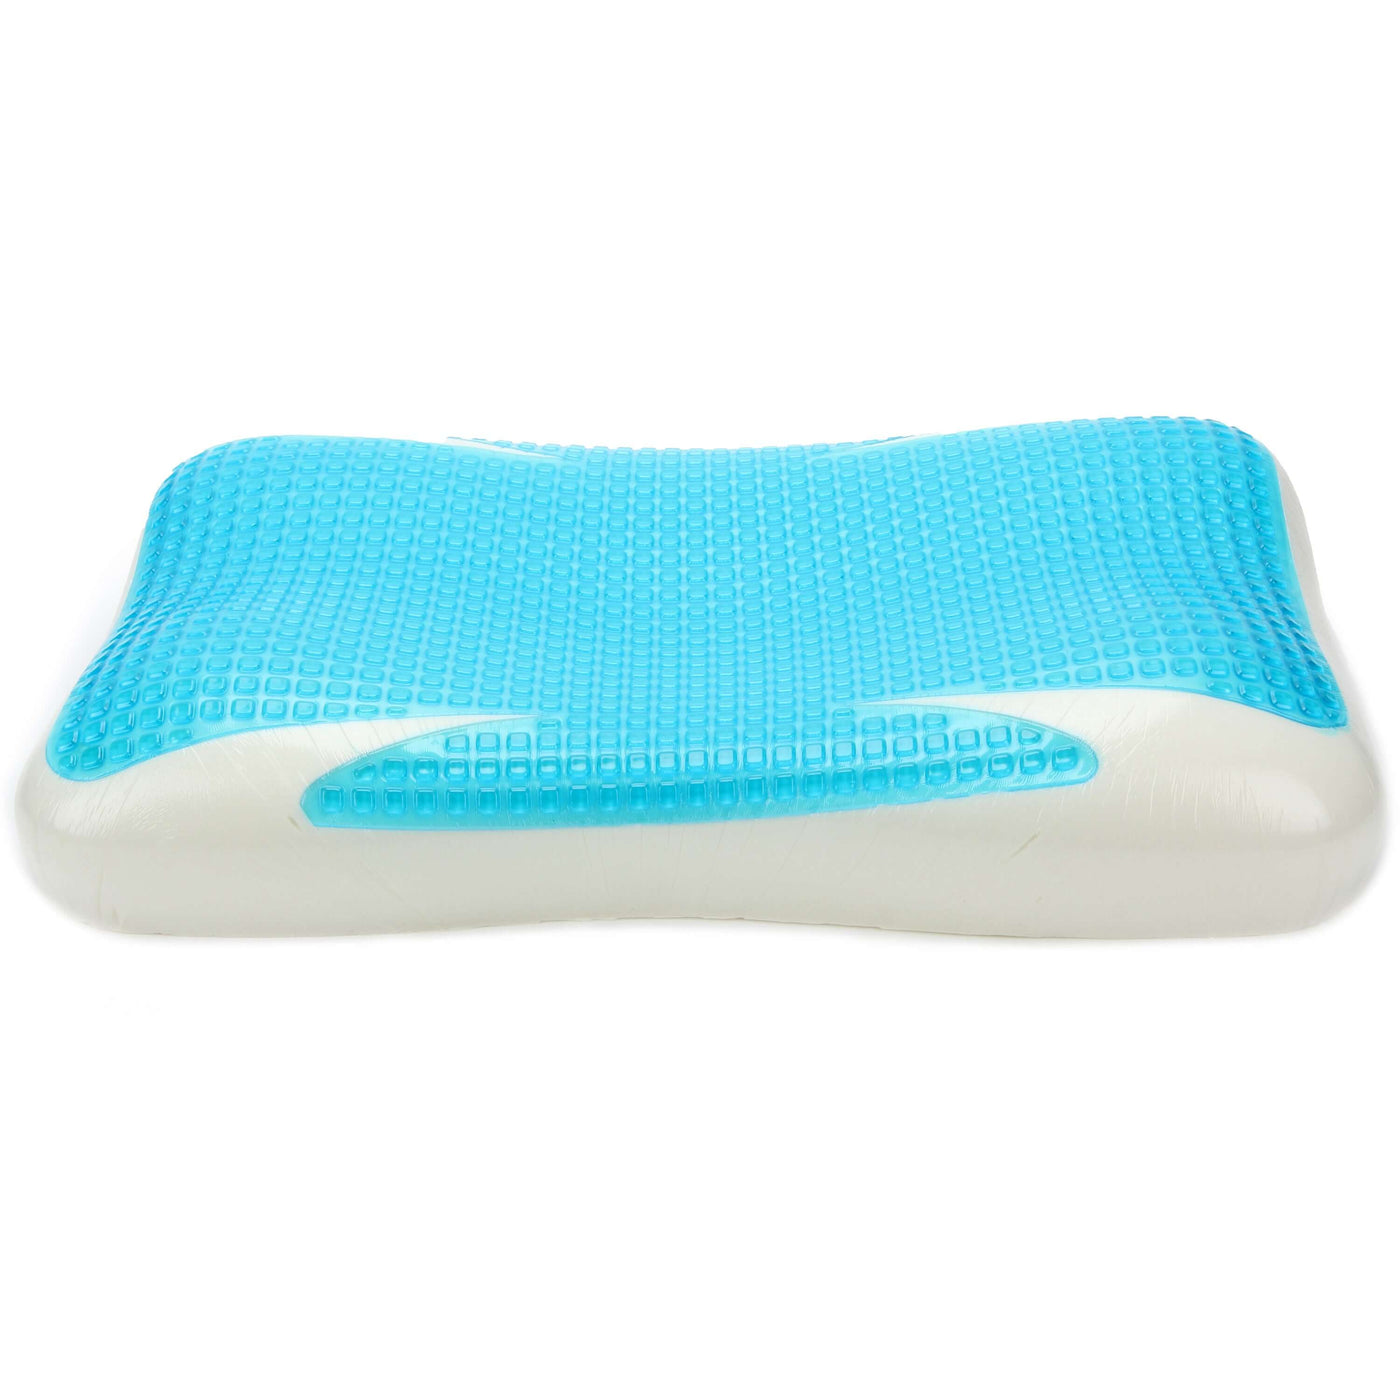 https://www.cheercollection.com/cdn/shop/products/cheer-collection-ventilated-cooling-pillow-supportive-memory-foam-cool-gel-sleeping-pillow-778306_1400x.jpg?v=1671776817